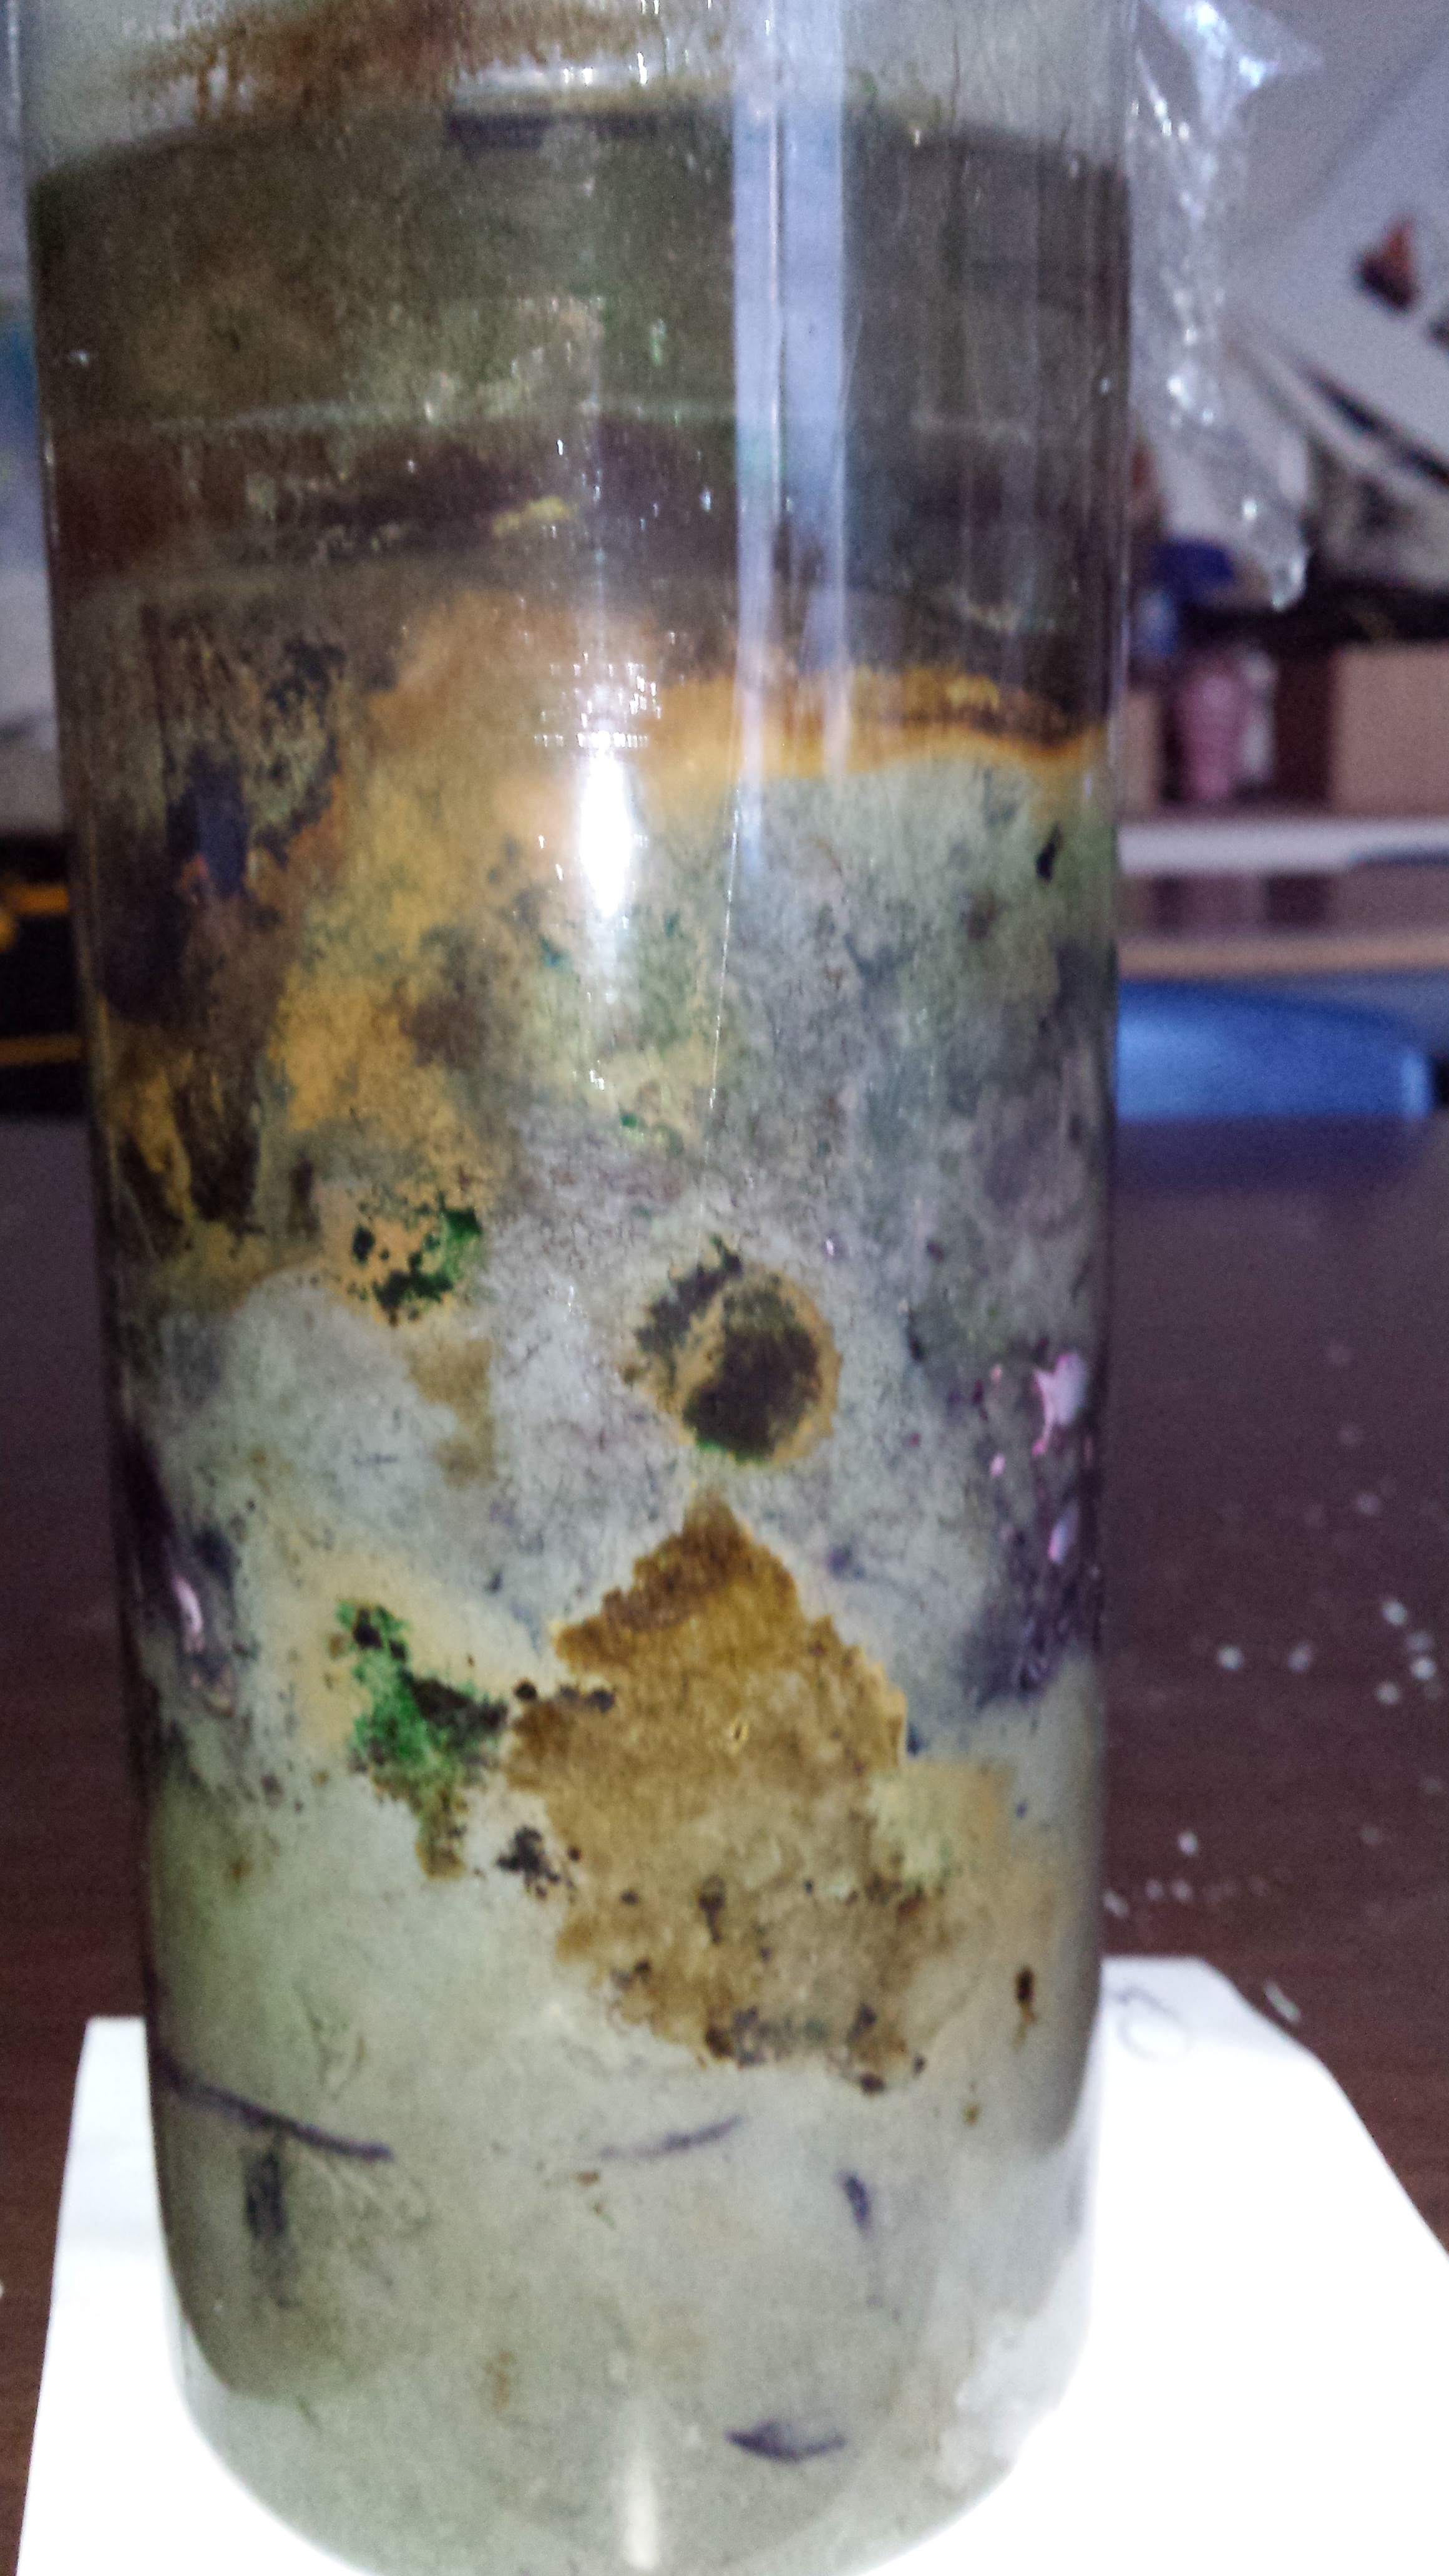  A Winogradsky Column growing microbes from the Petaluma River. 